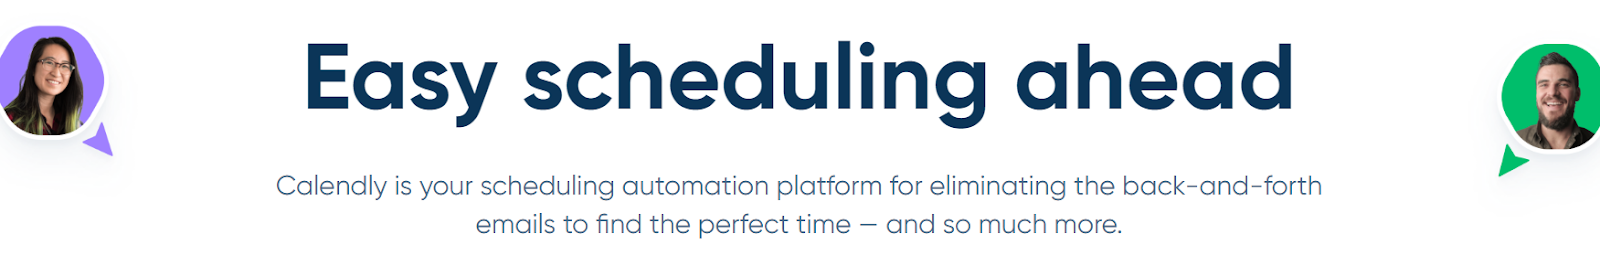 image showing calendly as sales automation software